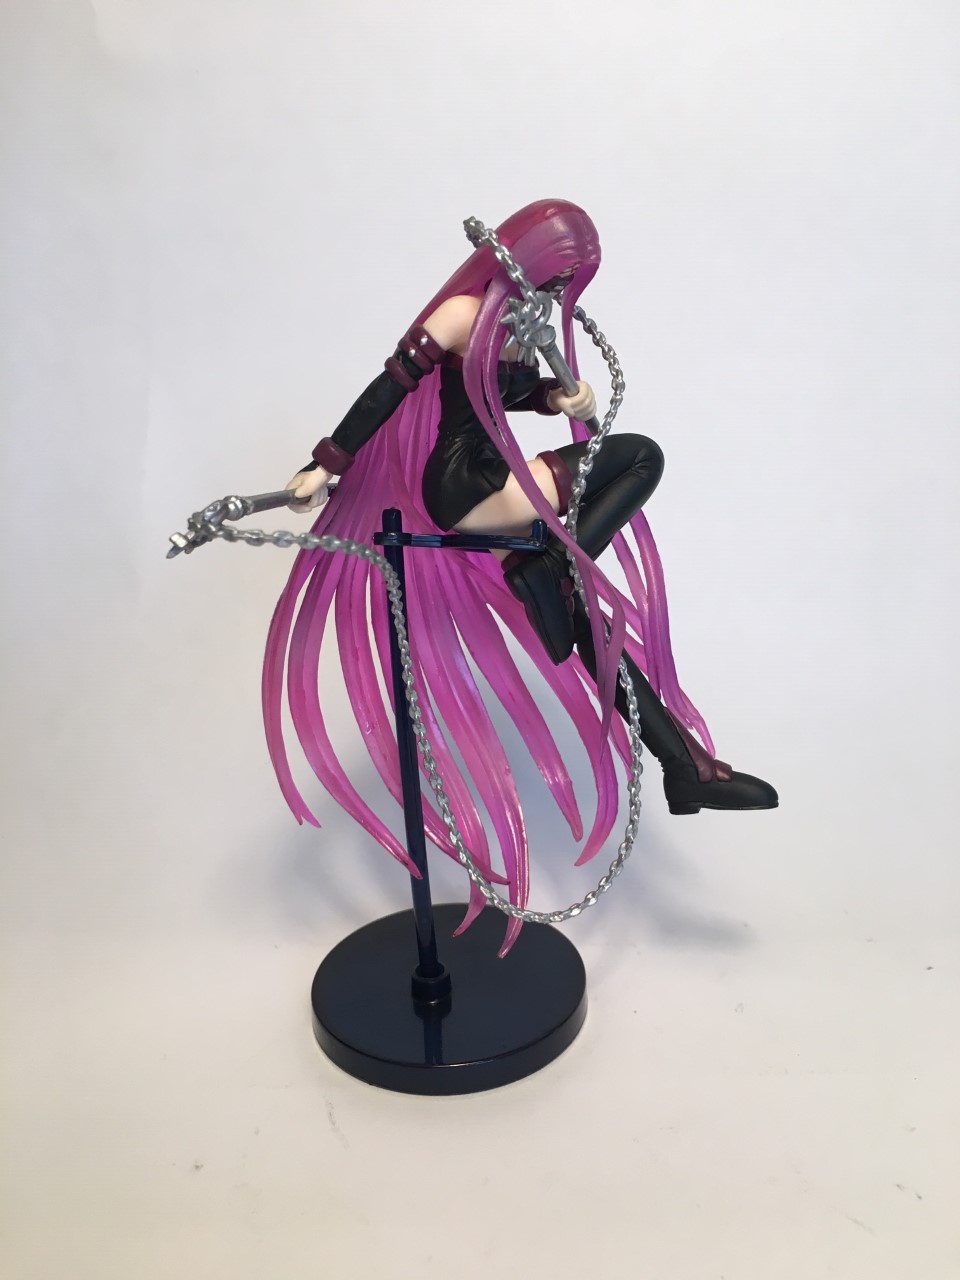 Details about   Unpainted GK Garage Resin Figure Fate/stay night Rider Model Kit 